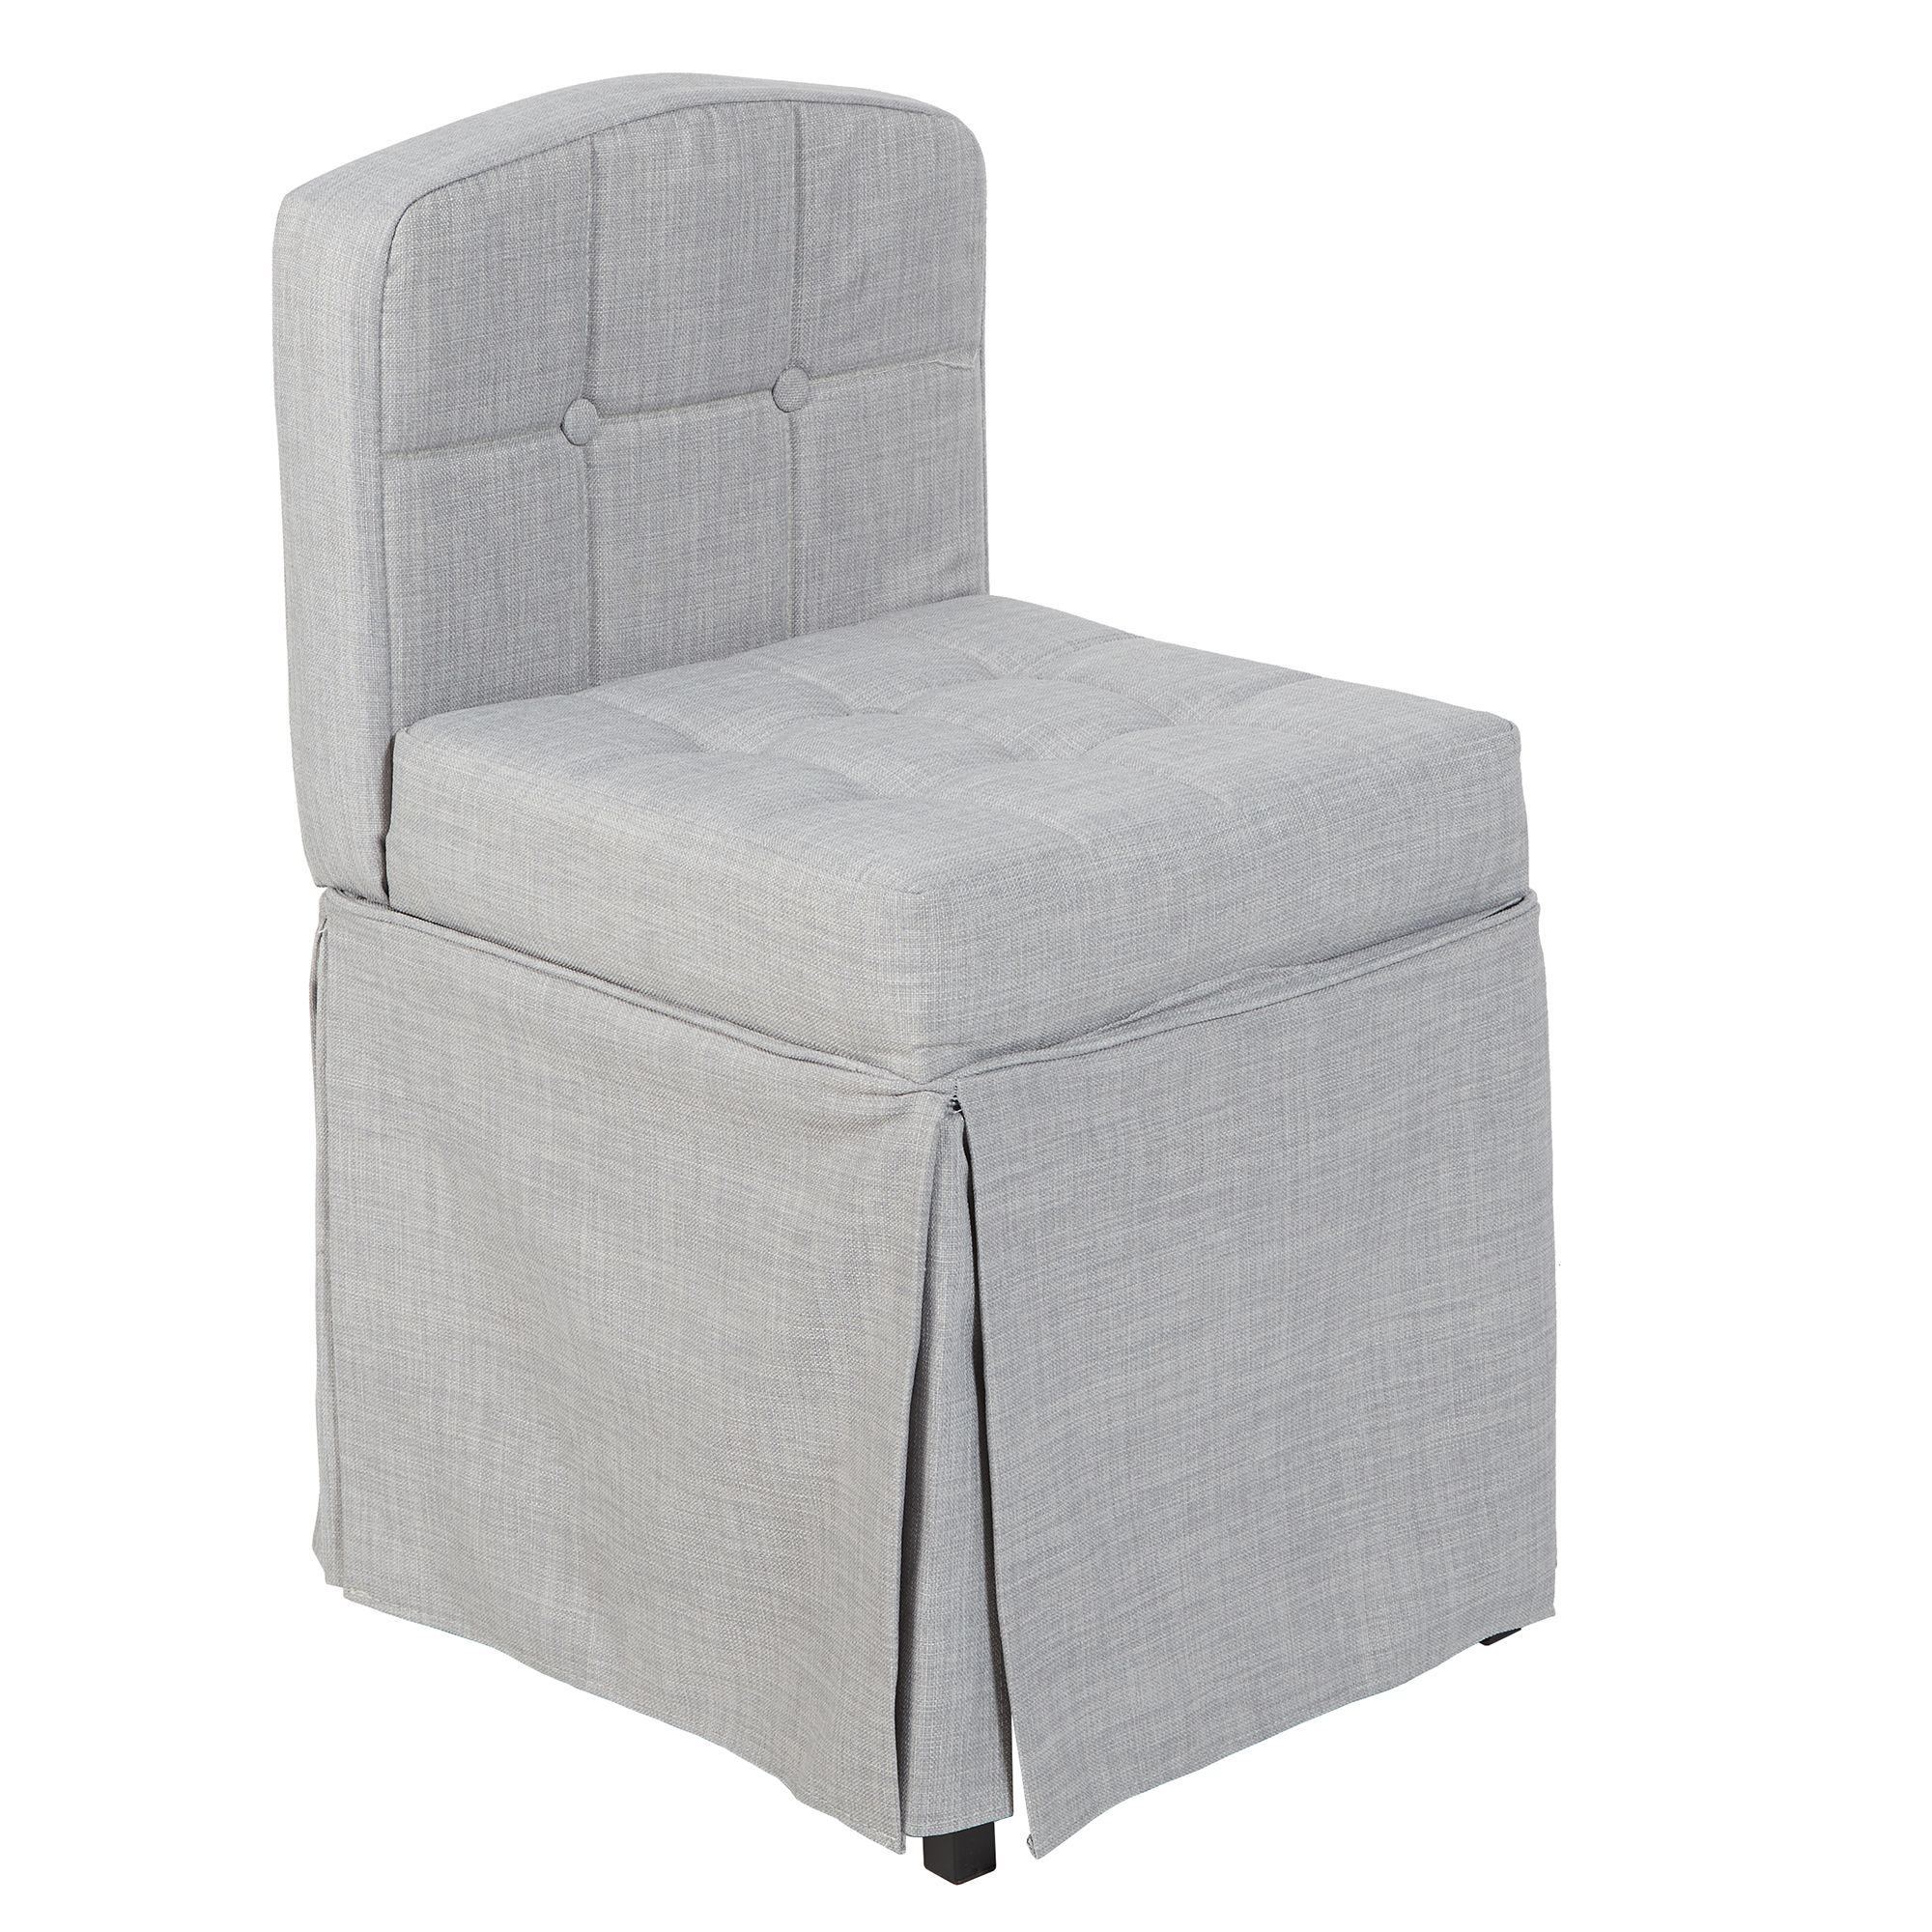 Sally Skirted Camelback Vanity Chair With Tufted Cushions – Walmart For Ivory Button Tufted Vanity Stools (View 17 of 20)